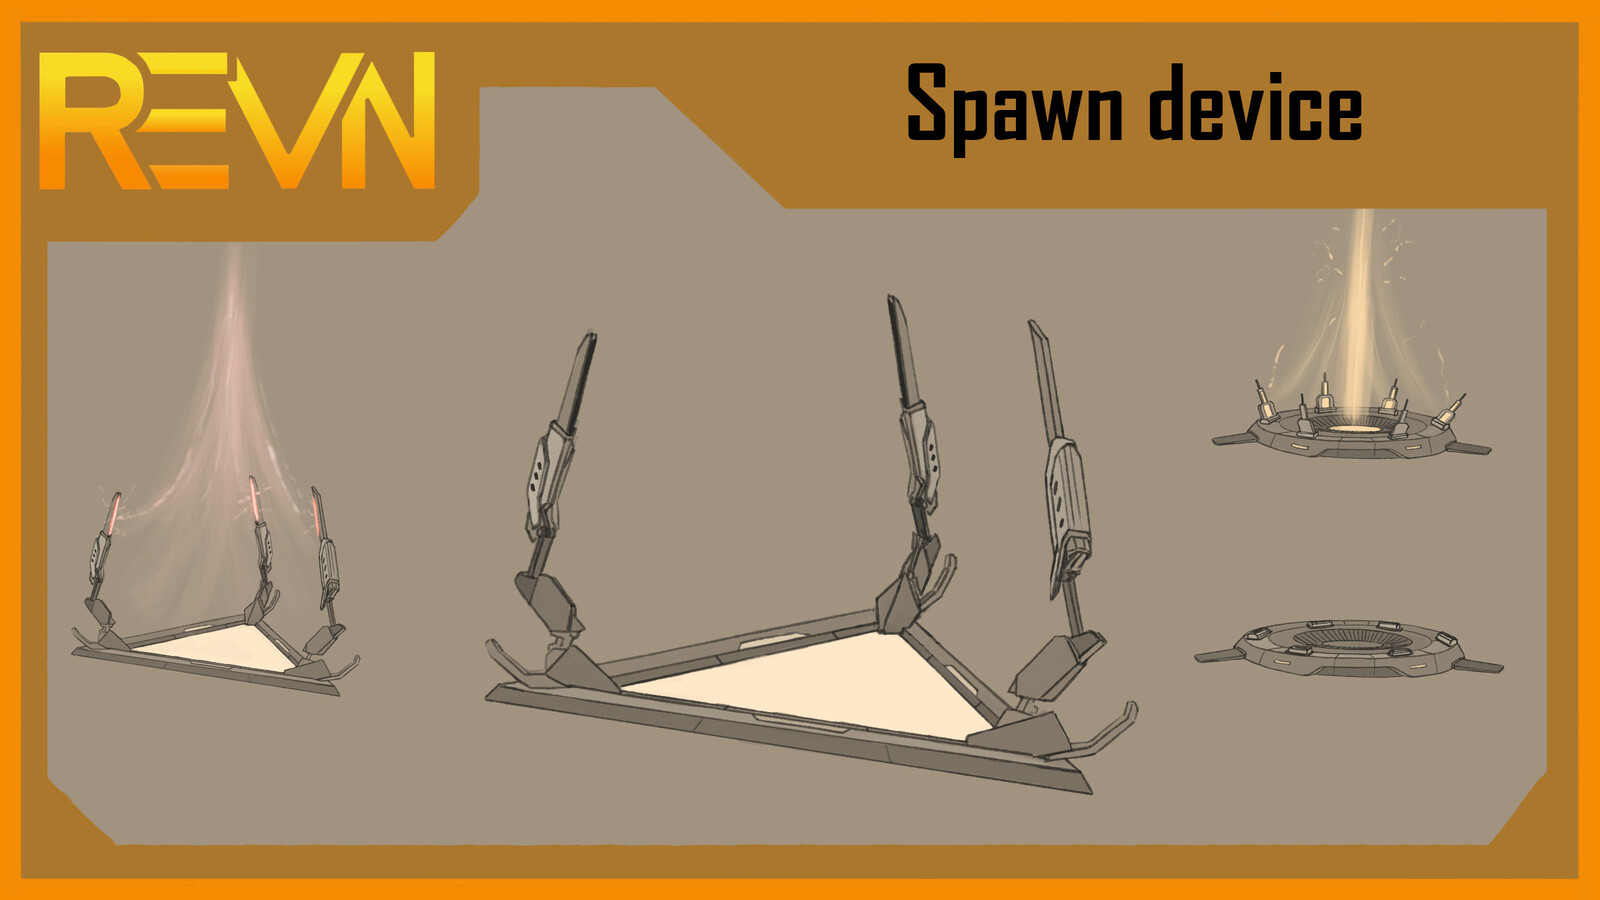 Concepts for a spawn device that would spawn friendly AI minions that would help you and your team. The idea was to have a device that would teleport minions in from another location.